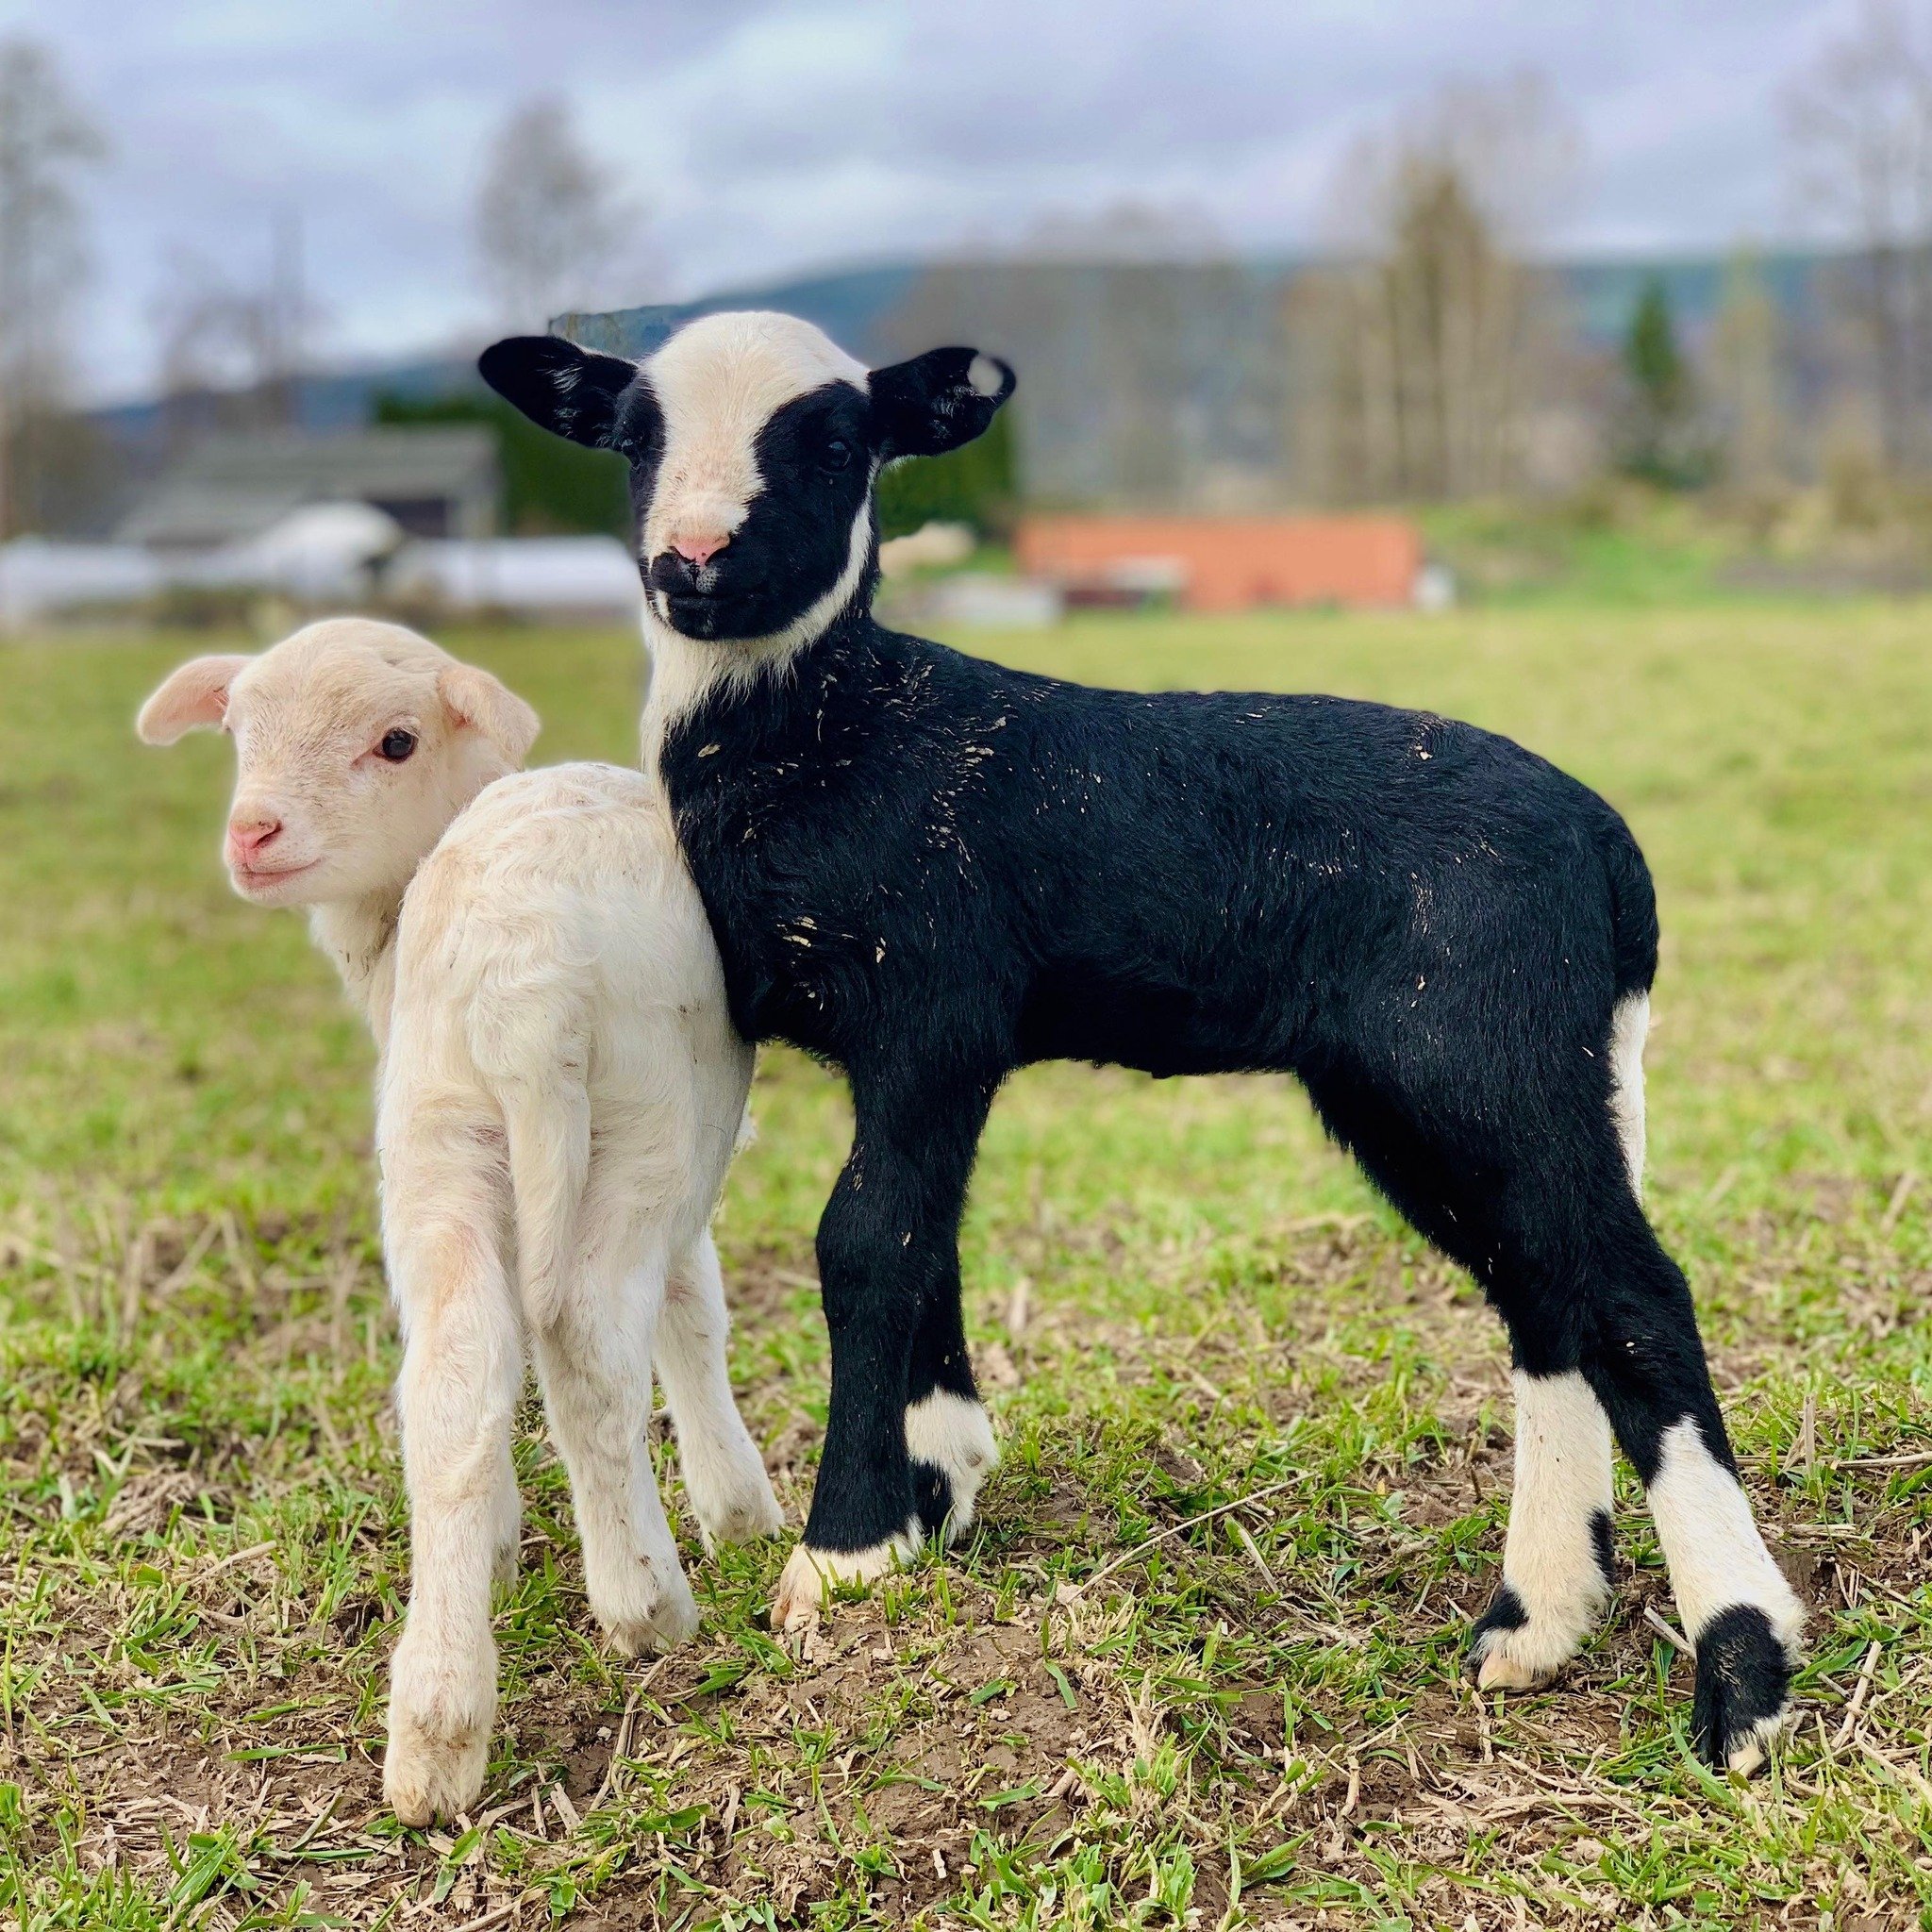 Save the date! Sprouts Festival on June 15th from 10am - 3pm will feature a bummer lamb petting area hosted by Big River Farms, goat yoga, Reach for the Stars dance performances and lots of great educational kids activities! 

Live music, food trucks